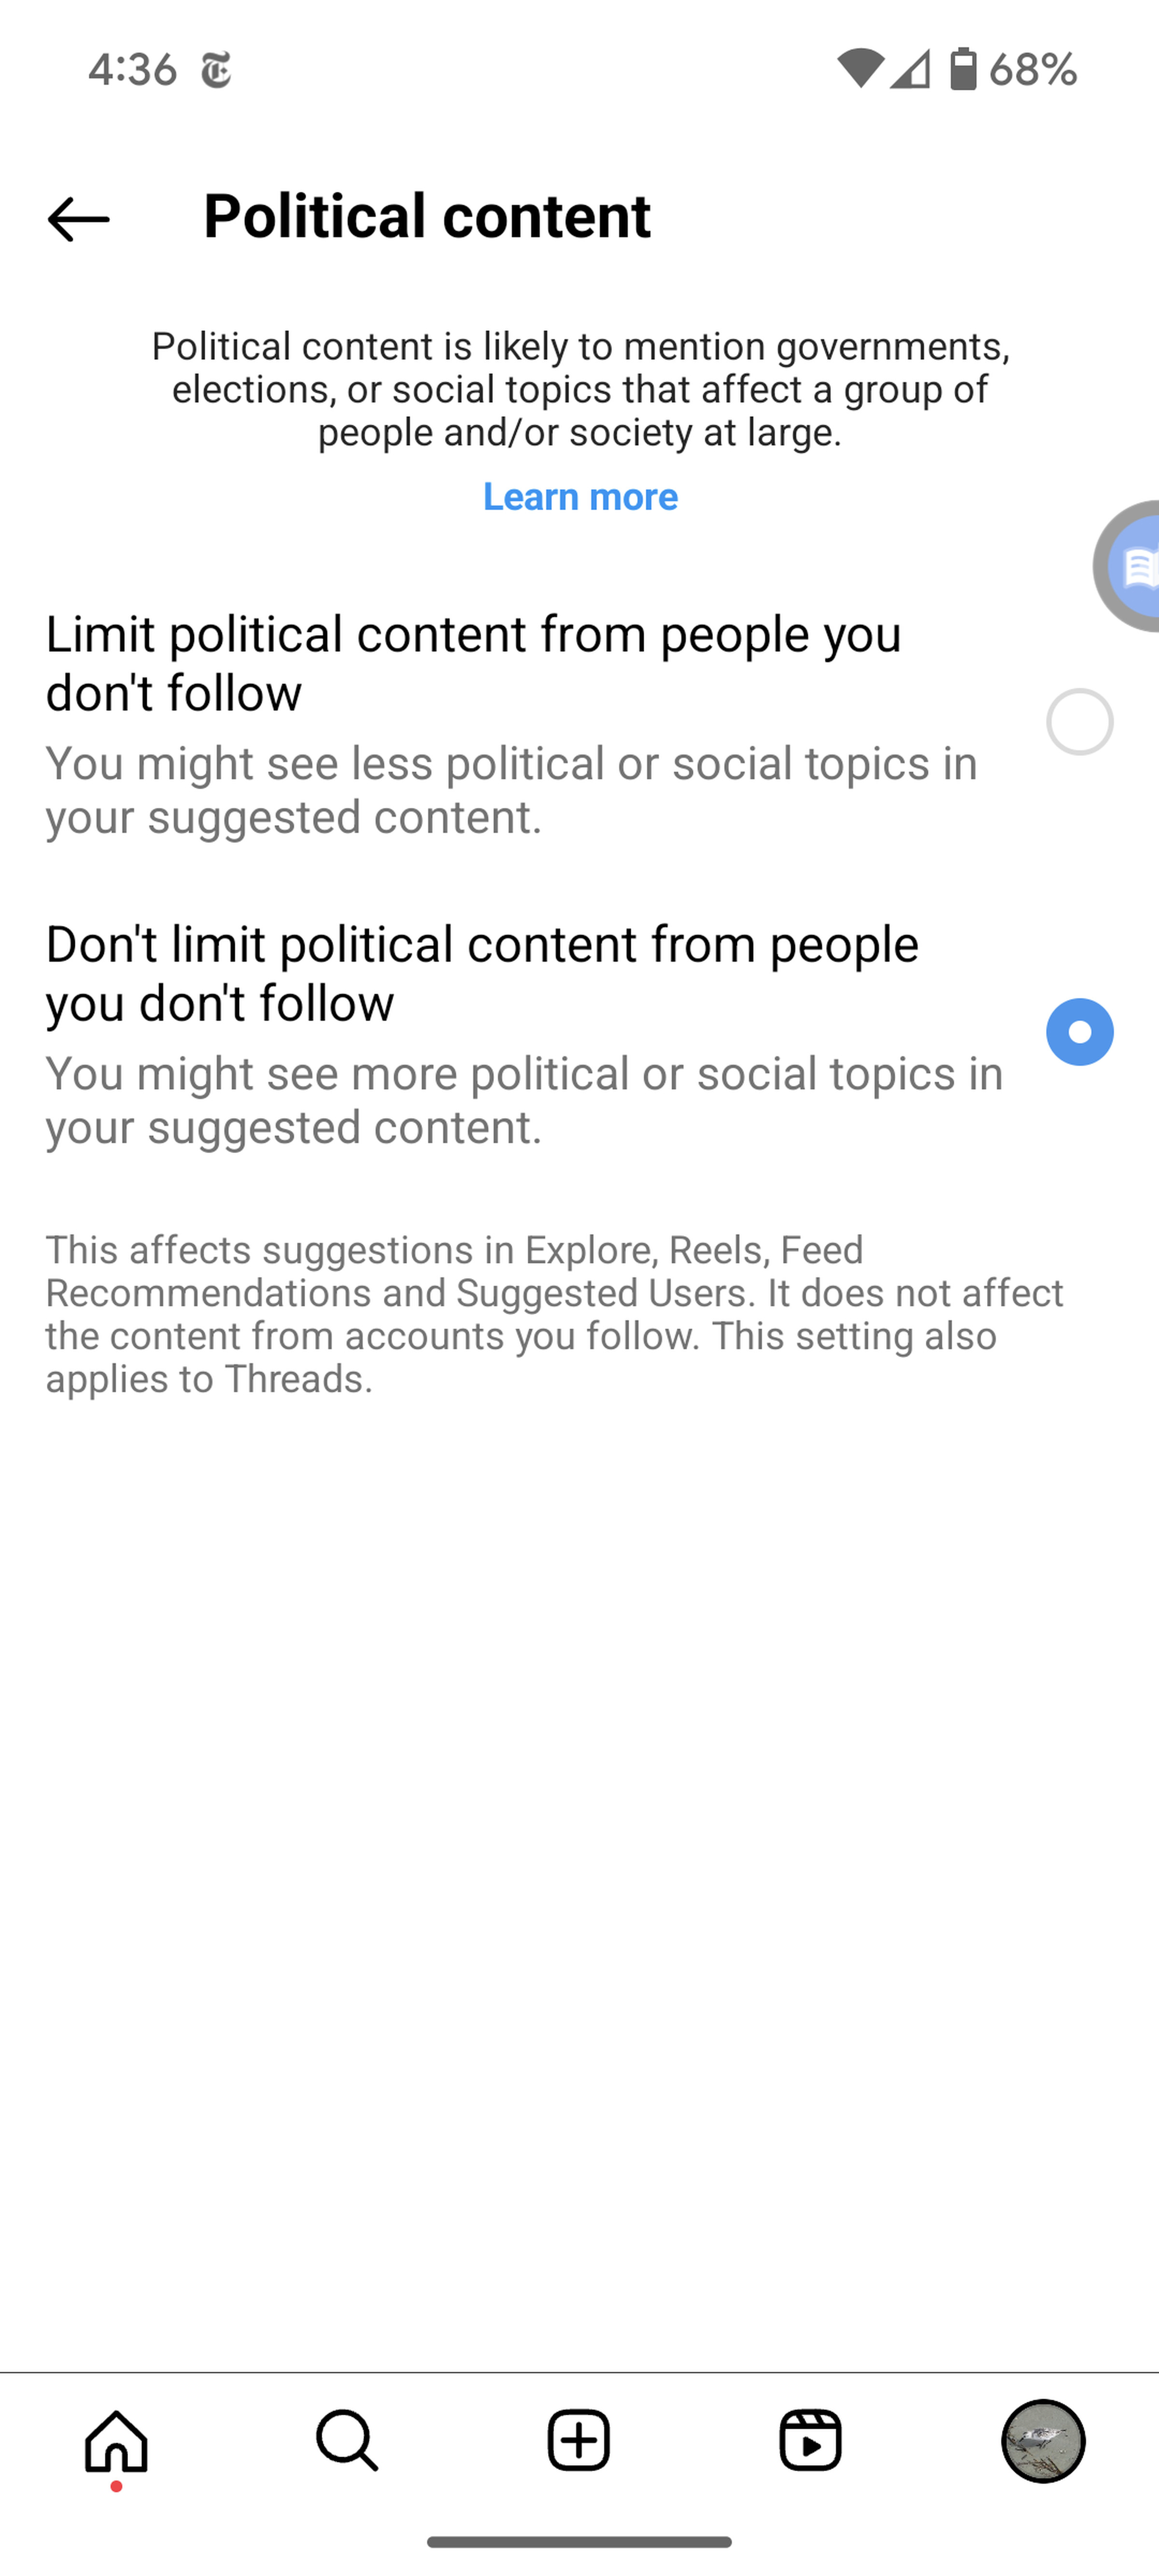 Mobile page headed Political content with choices to limit or don’t limit political content from people you don’t follow.